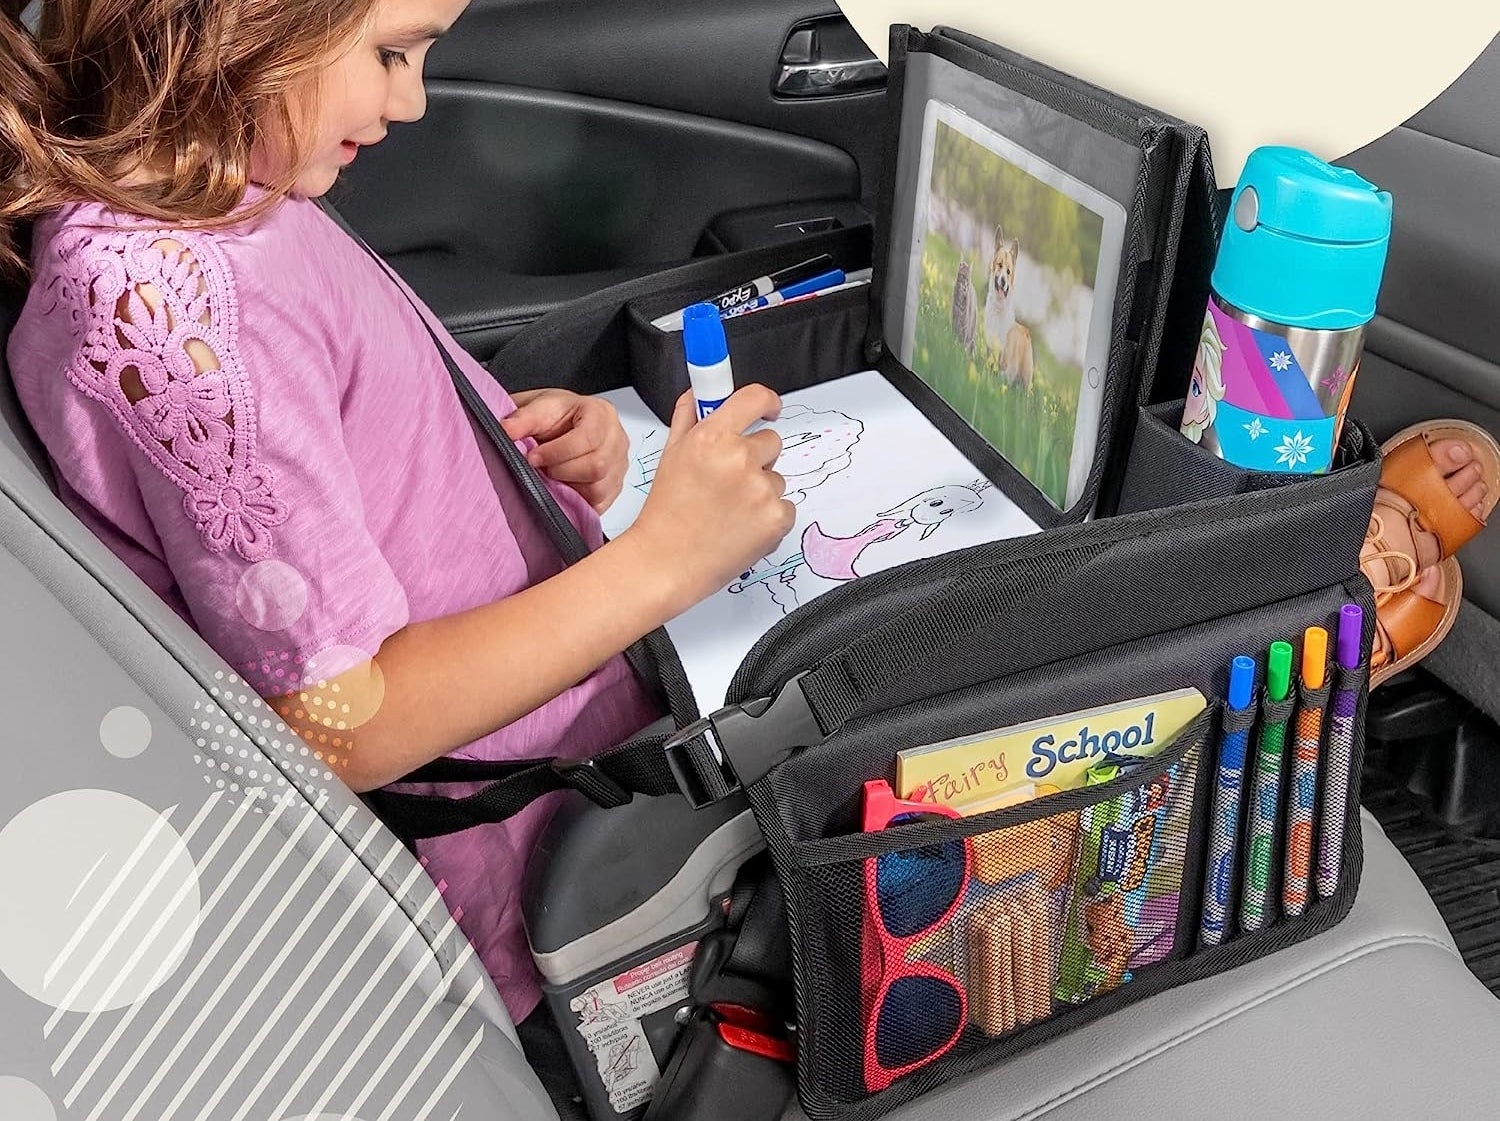 Child model sitting in car drawing with black travel tray on lap